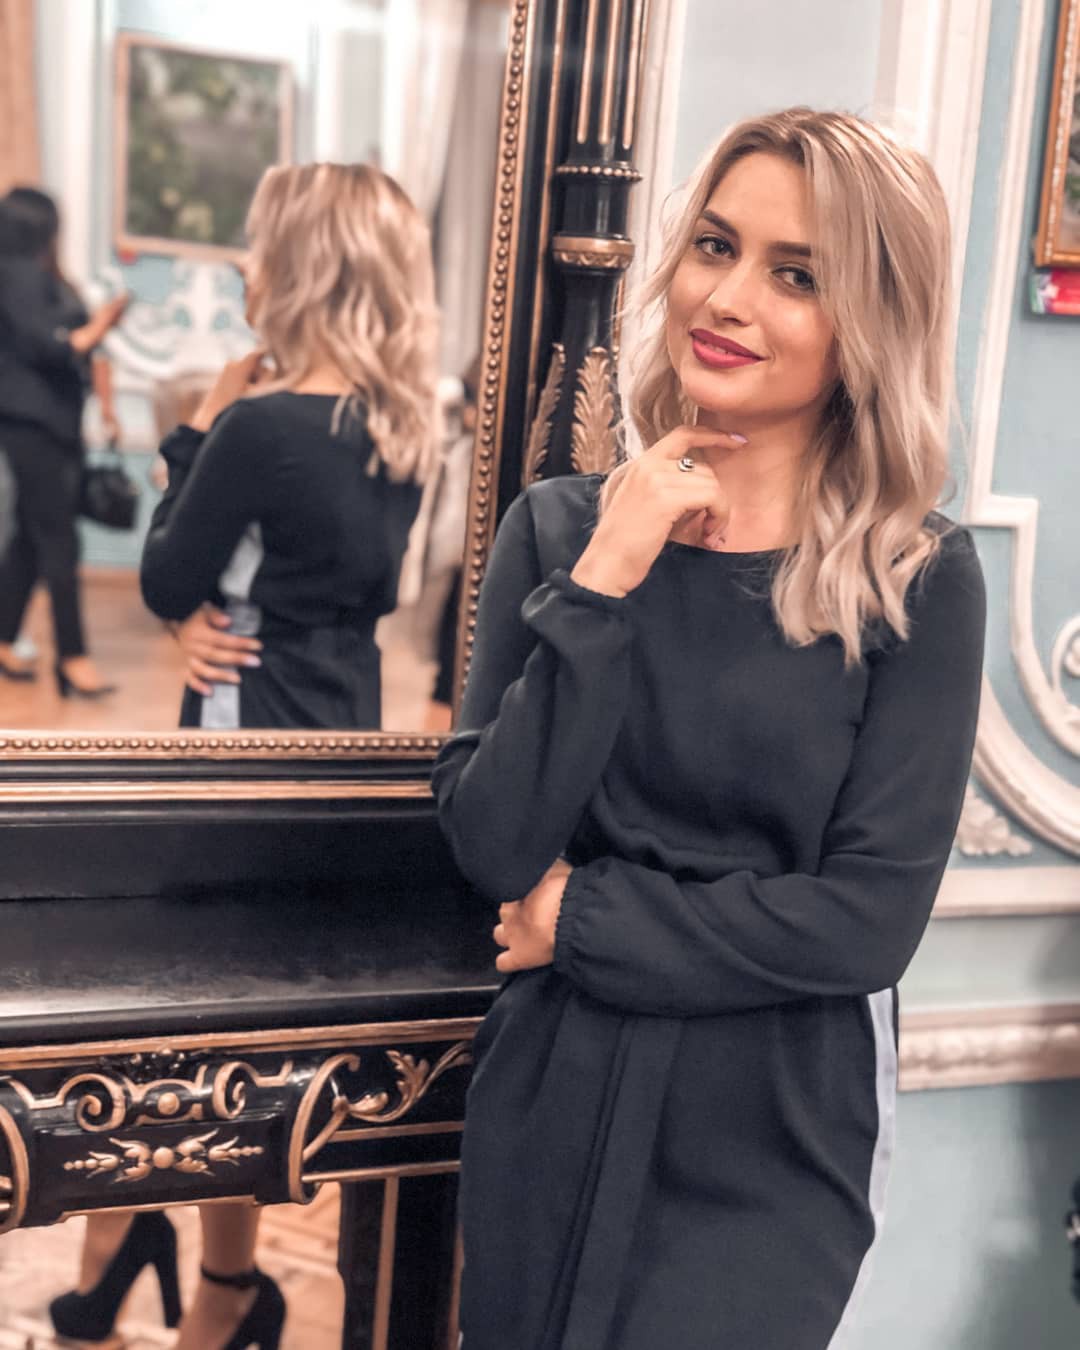 black outfits for women with little black dress, blond hairstyle, Long Layered Hair: Cute Hairstyles,  Little Black Dress,  Black Little Black Dress  